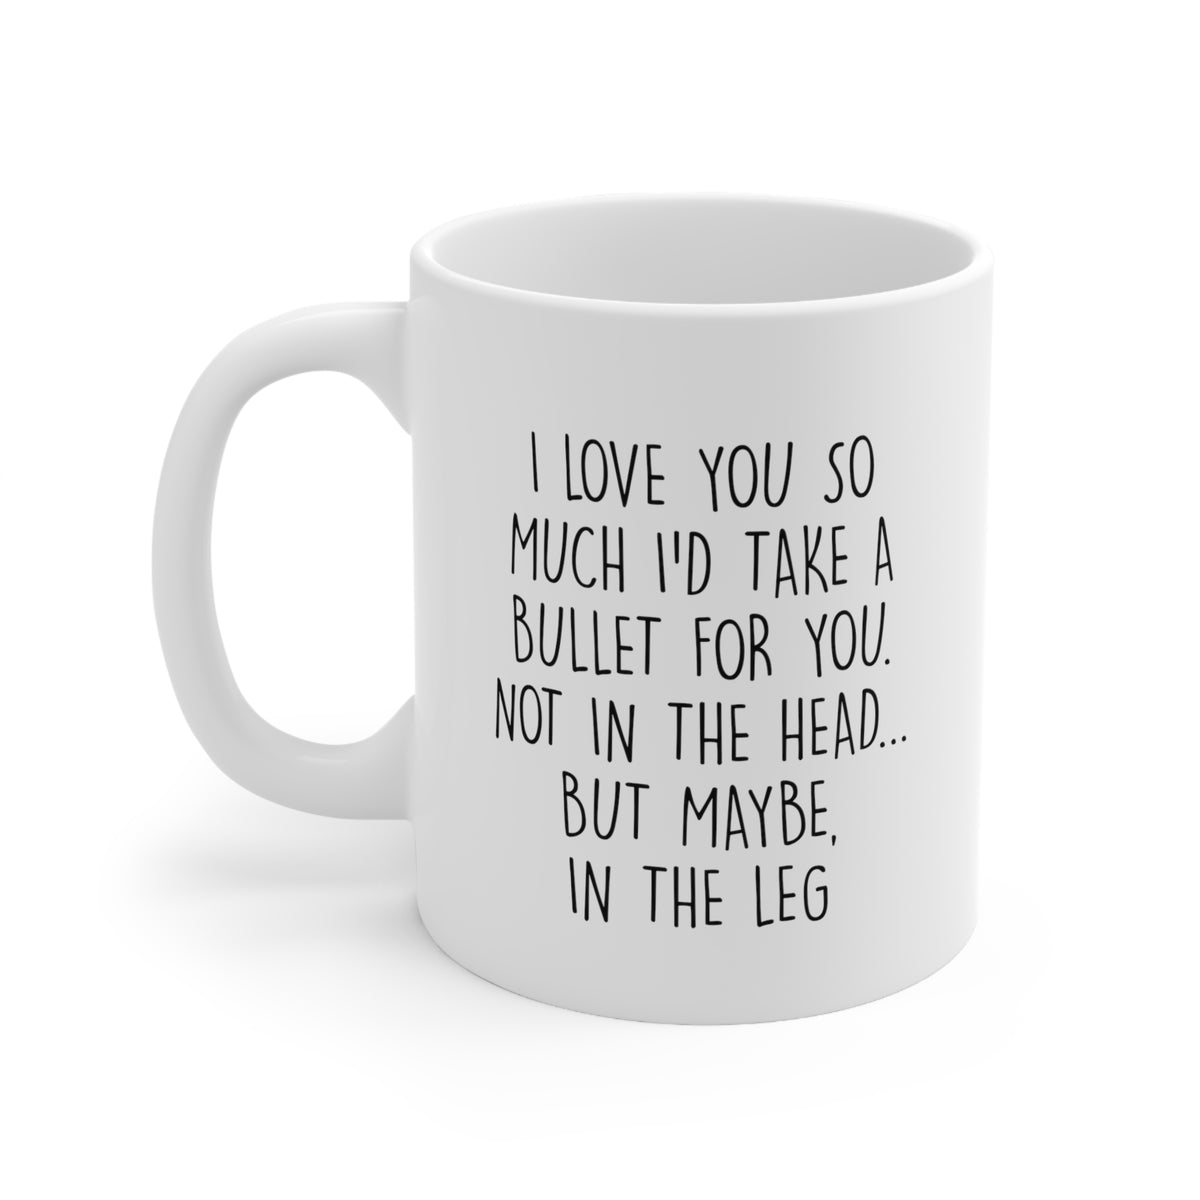 Valentins Day, I Love You So Much I'd Take A Bullet For You, Funny Coffee Mug For Him Her, Love Cup For Wife Husband